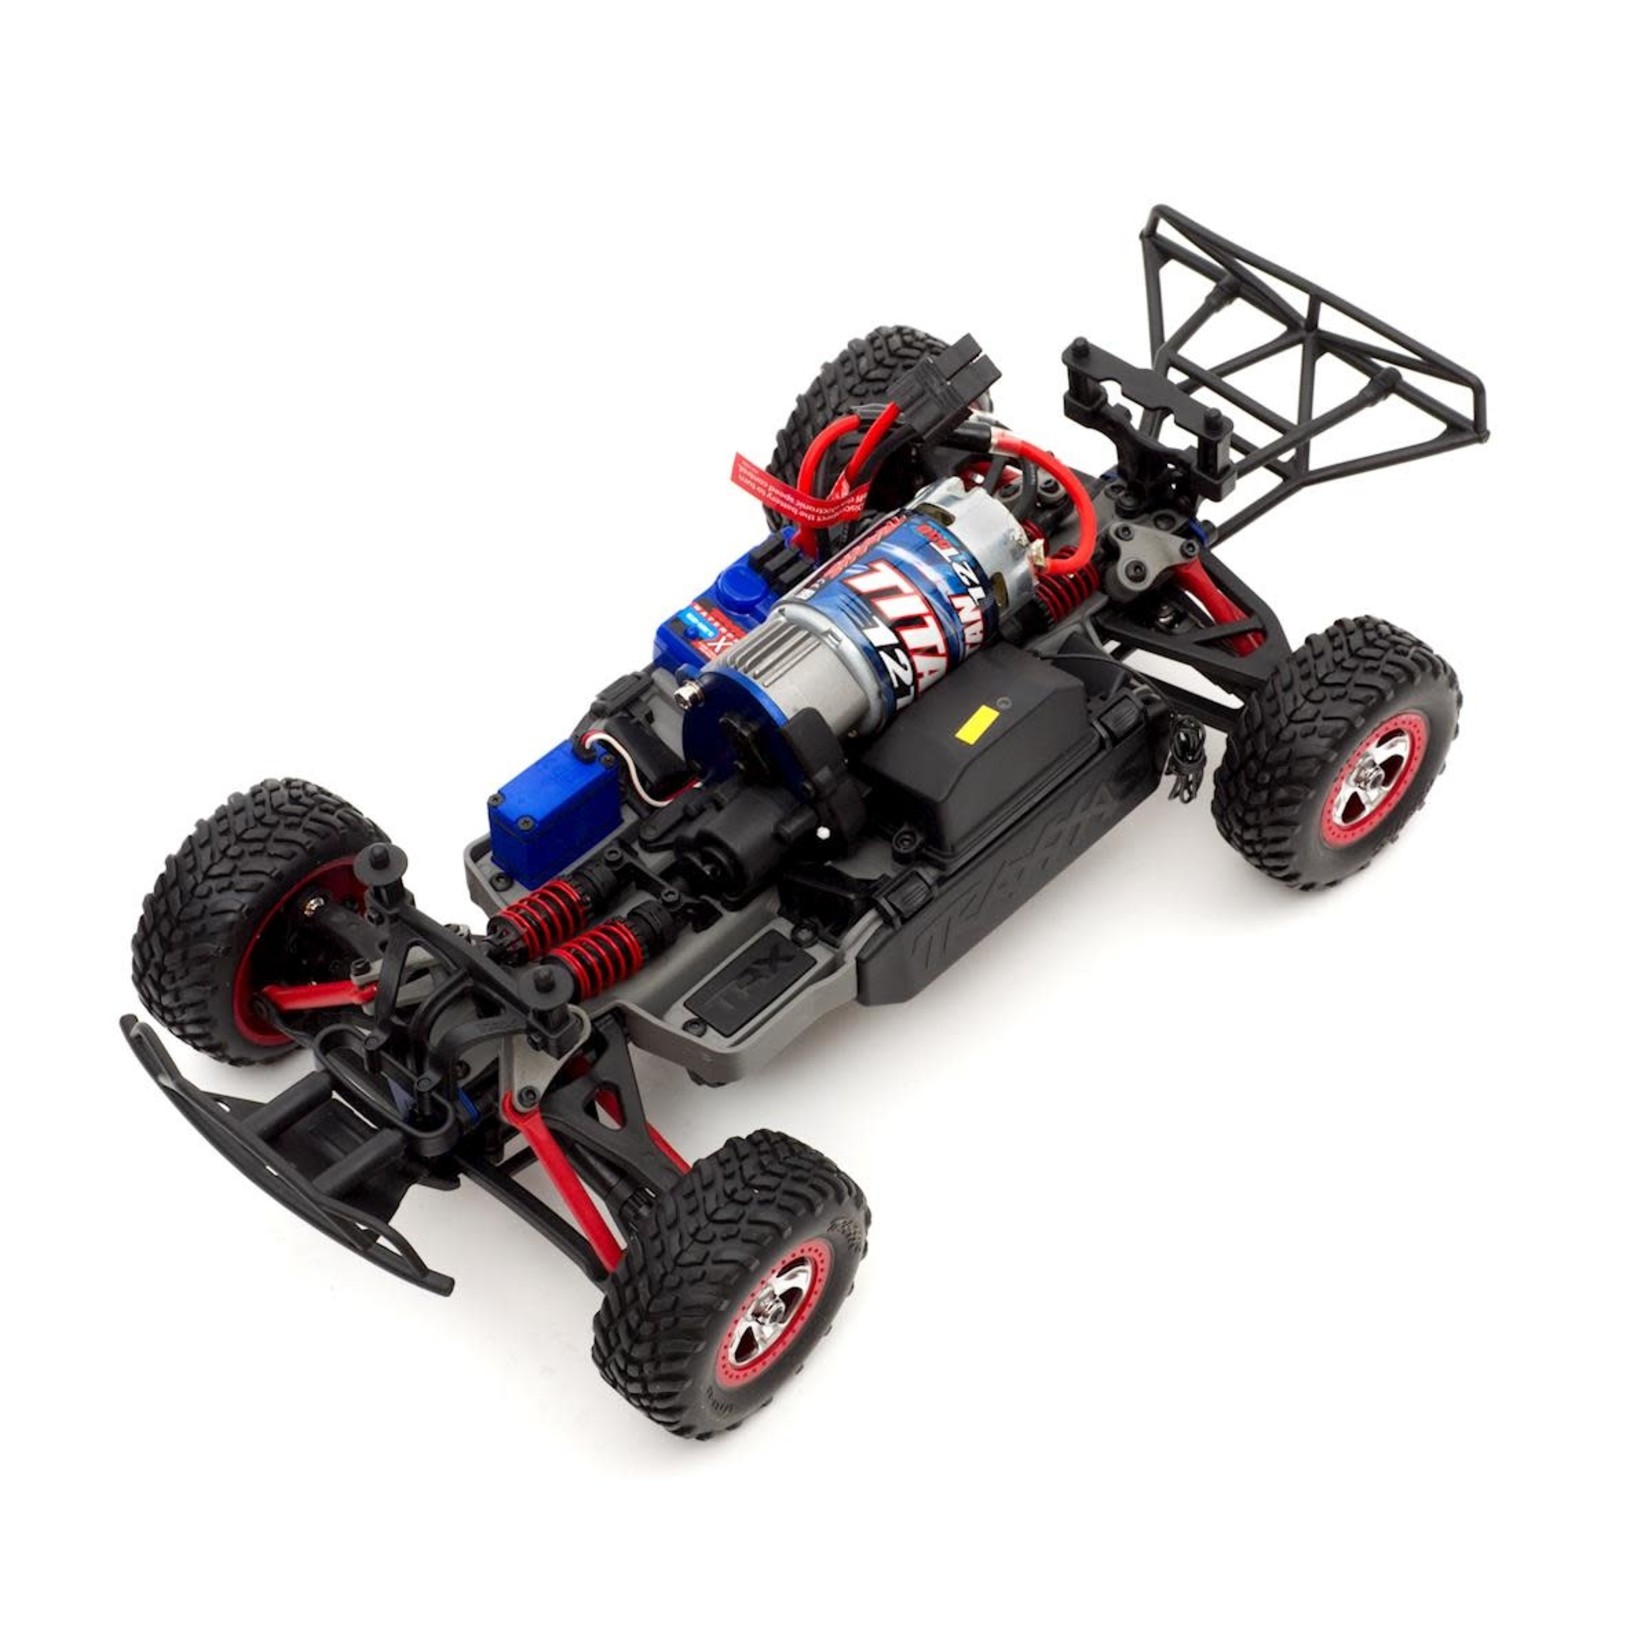 Traxxas Traxxas Slash 4x4 1/16 4WD RTR Short Course Truck (Mike Jenkins) w/TQ 2.4GHz Radio, Battery & DC Charger #70054-1-Mike